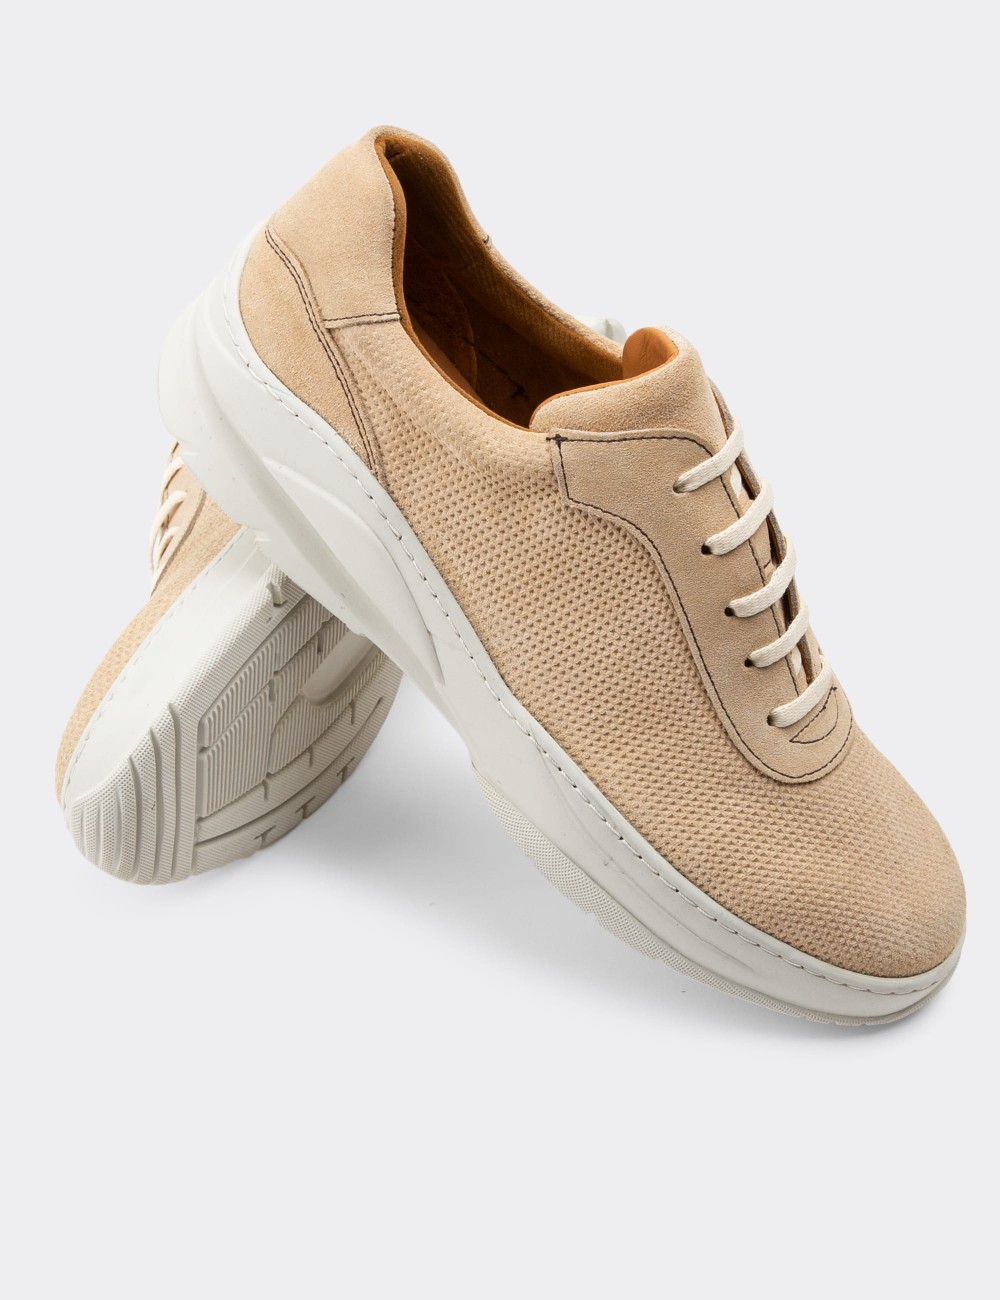 Beige Suede Leather Sneakers - 01879MBEJC02